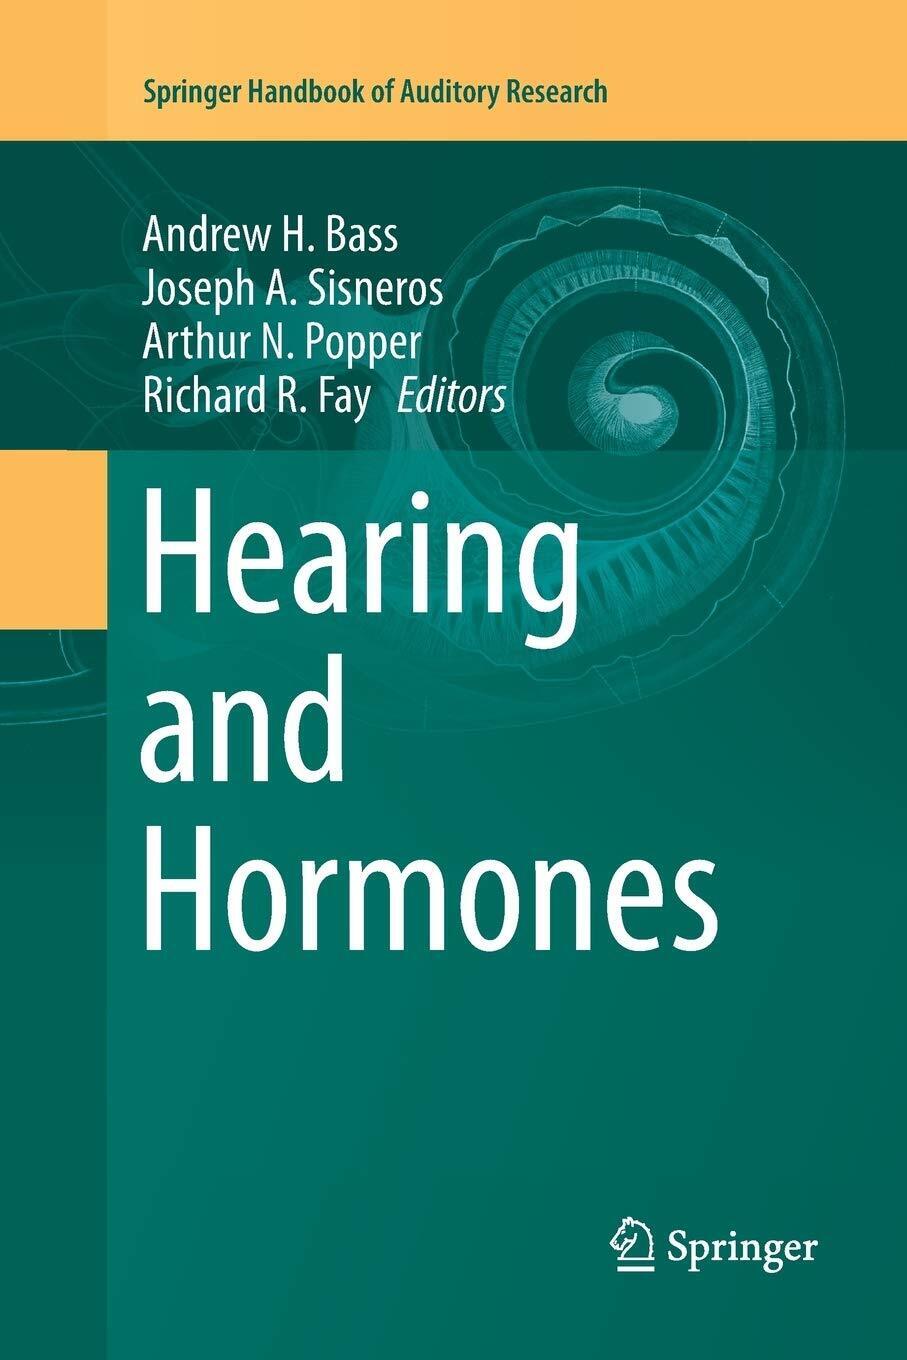 Hearing and Hormones - Andrew H. Bass - Springer, 2018